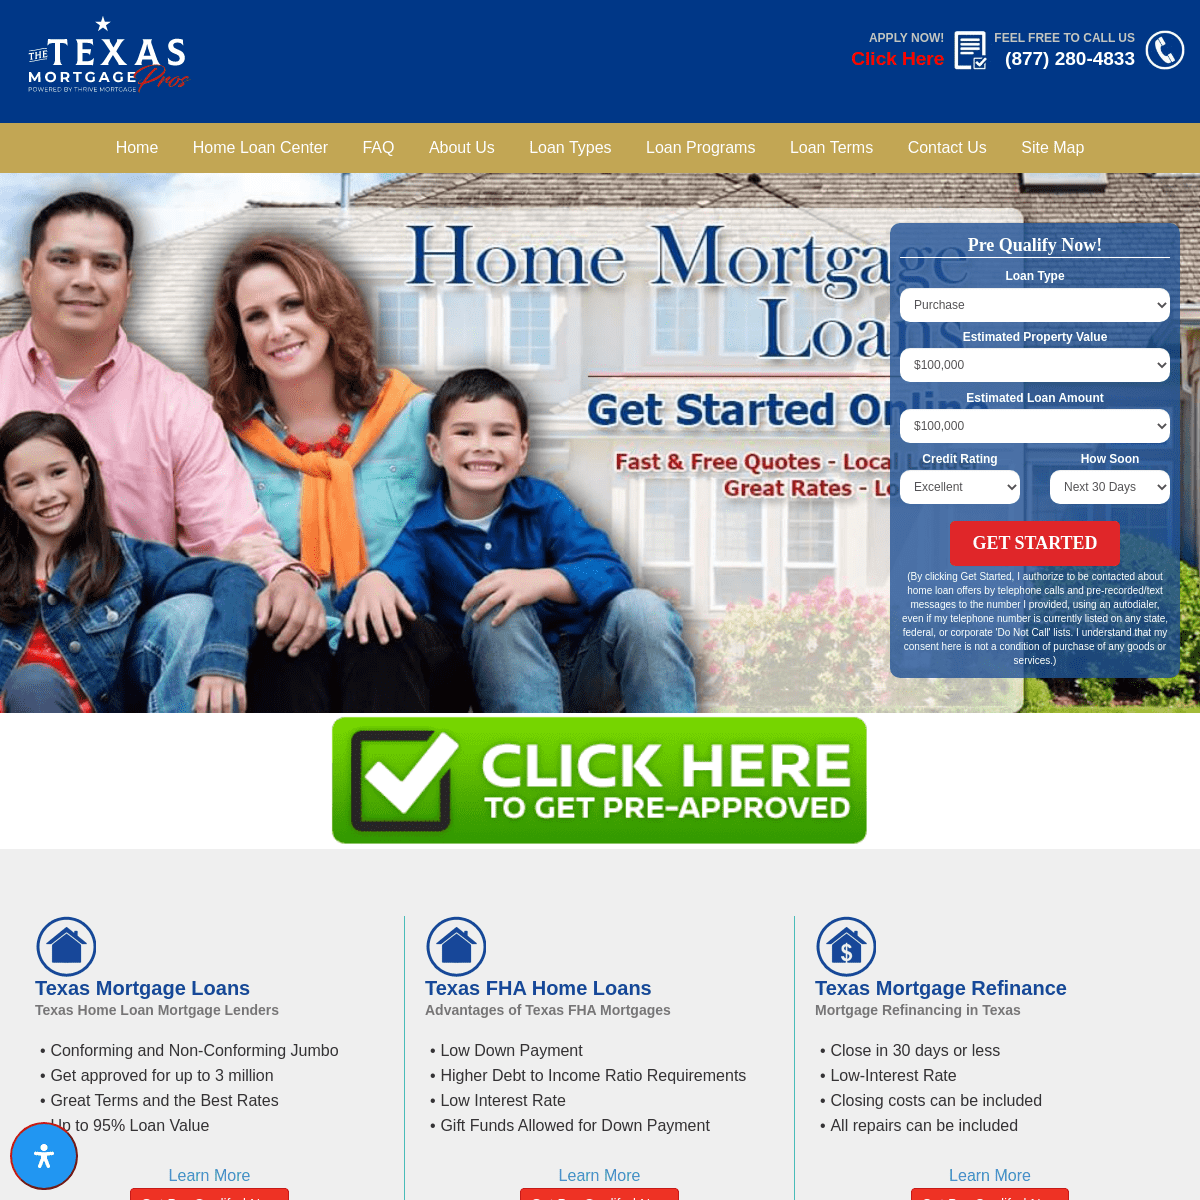 A complete backup of https://thetexasmortgagepros.com